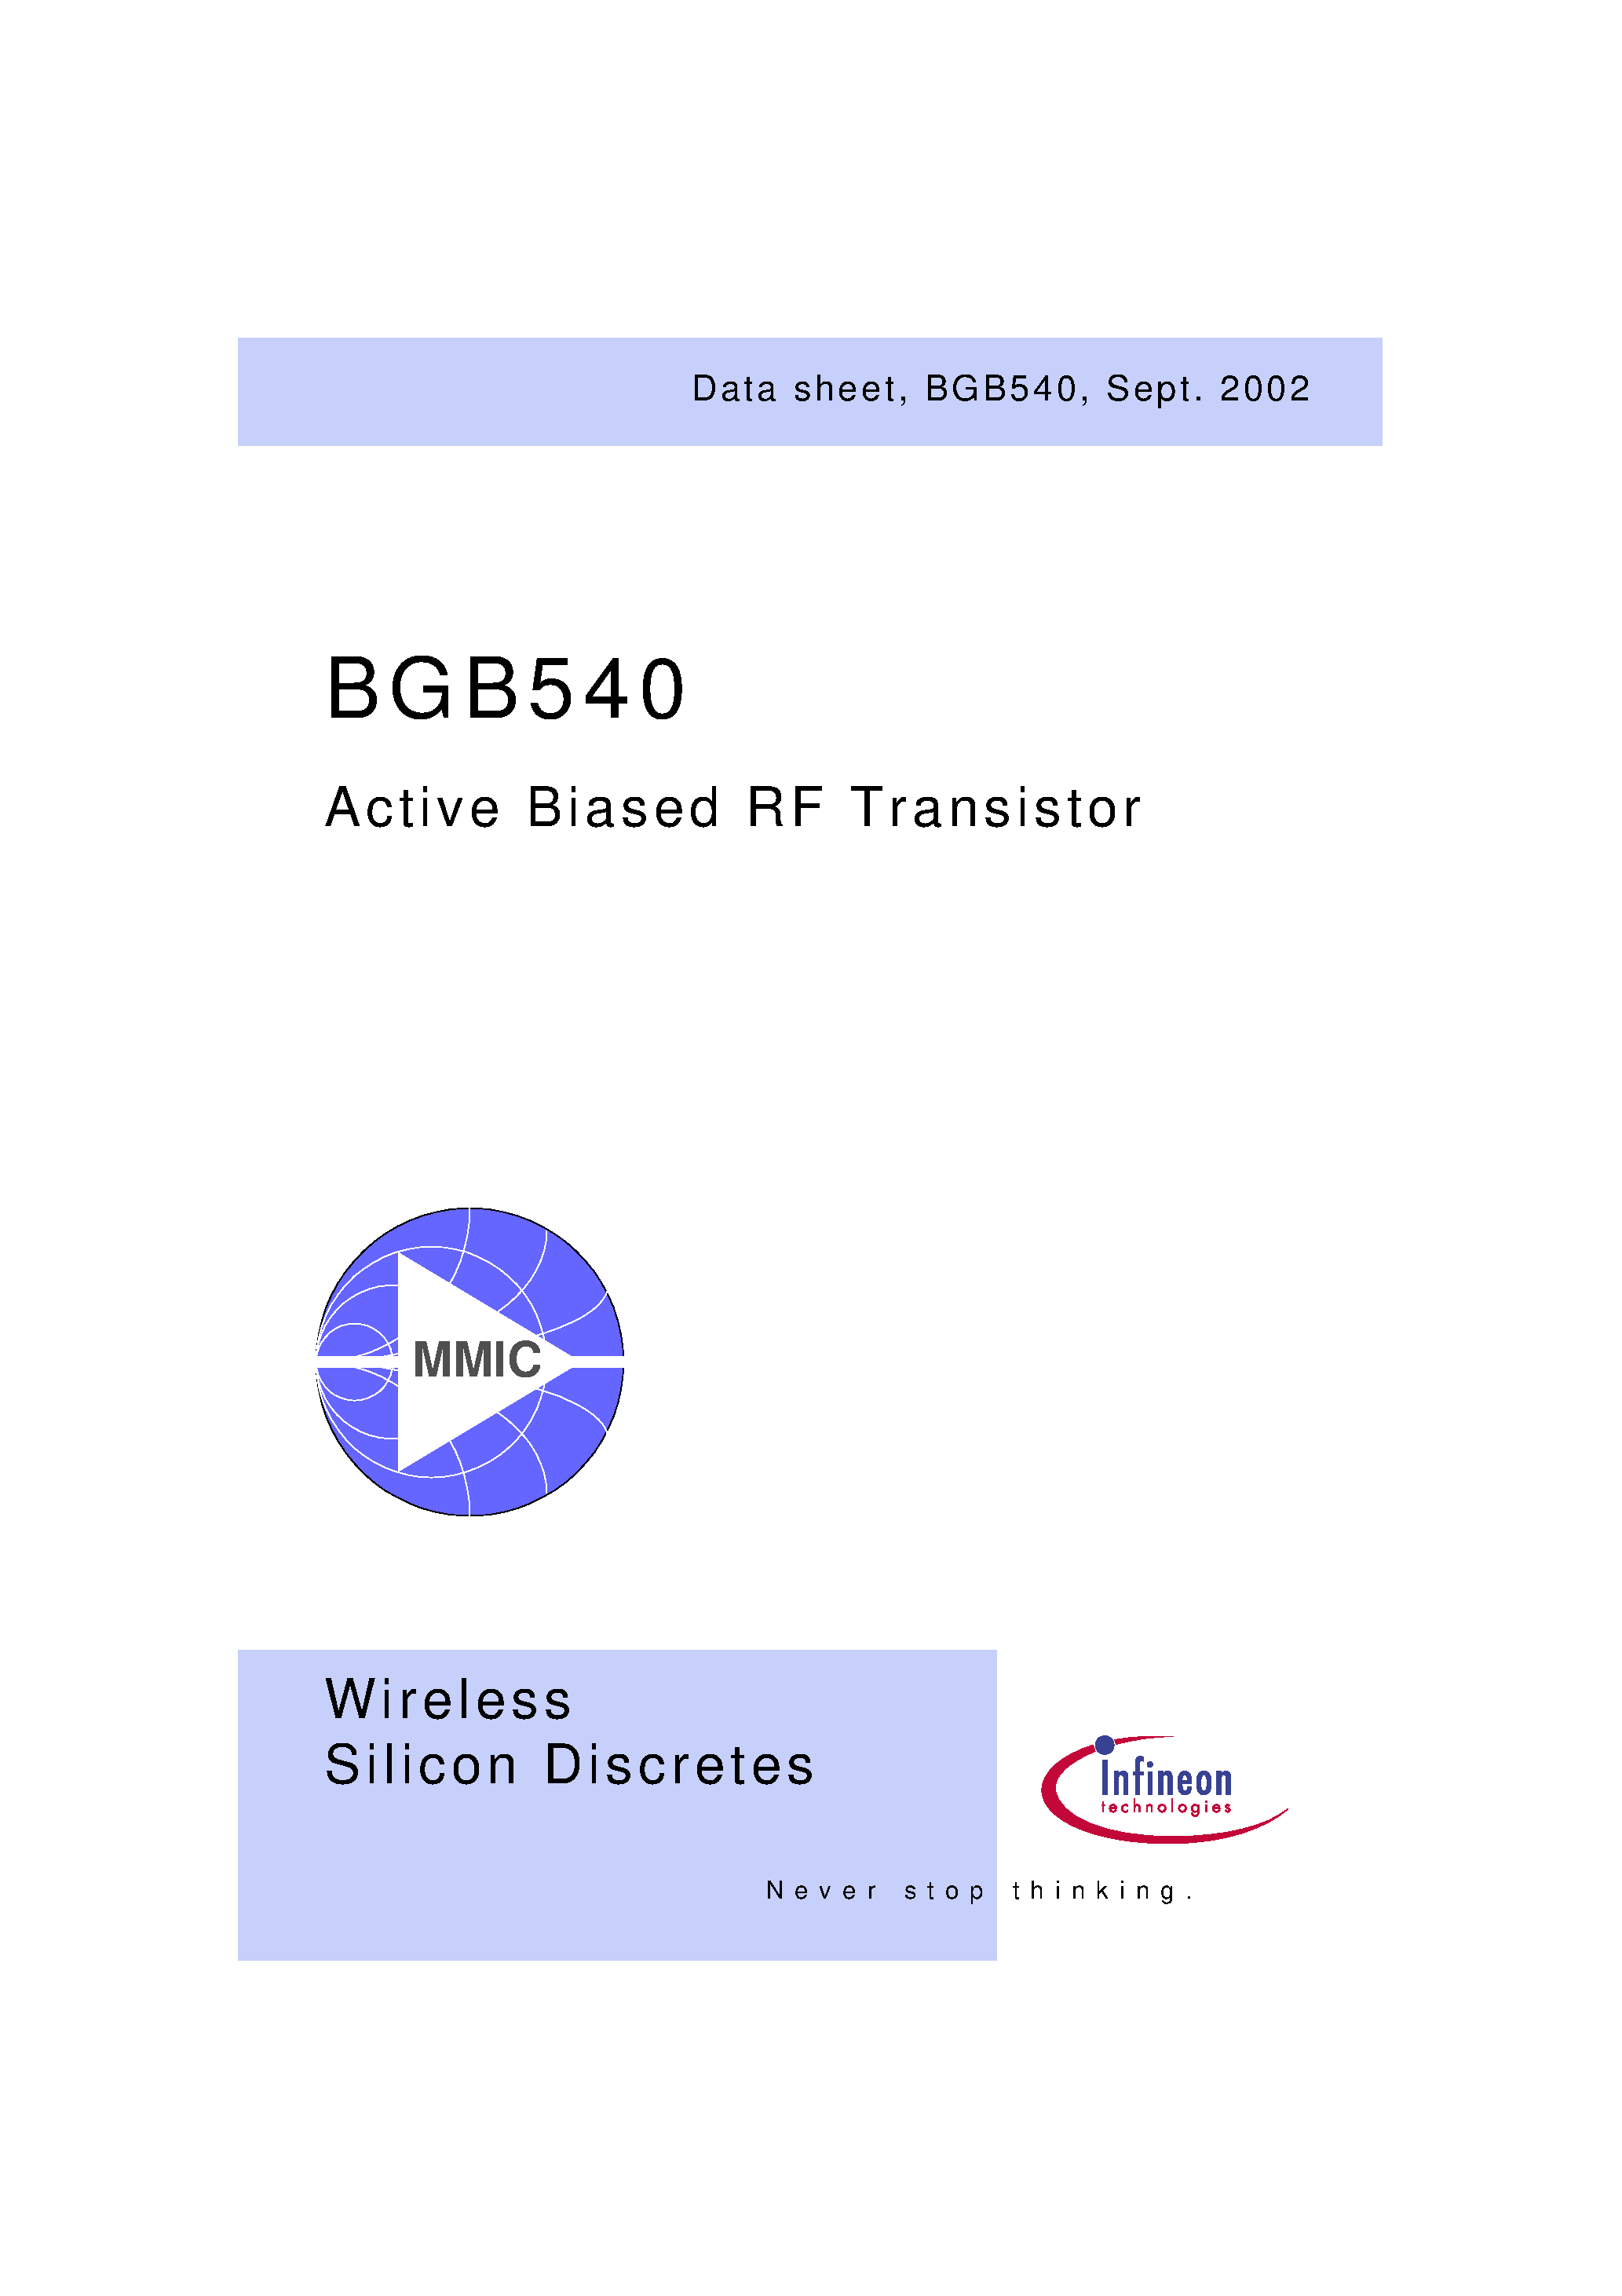 Datasheet BGB540 - A 35 dB Gain-Sloped LNB I.F. Amplifier for Direct Broadcast Satellite Television Applications using the BGA430 & BGB540 Silicon MMICs page 1